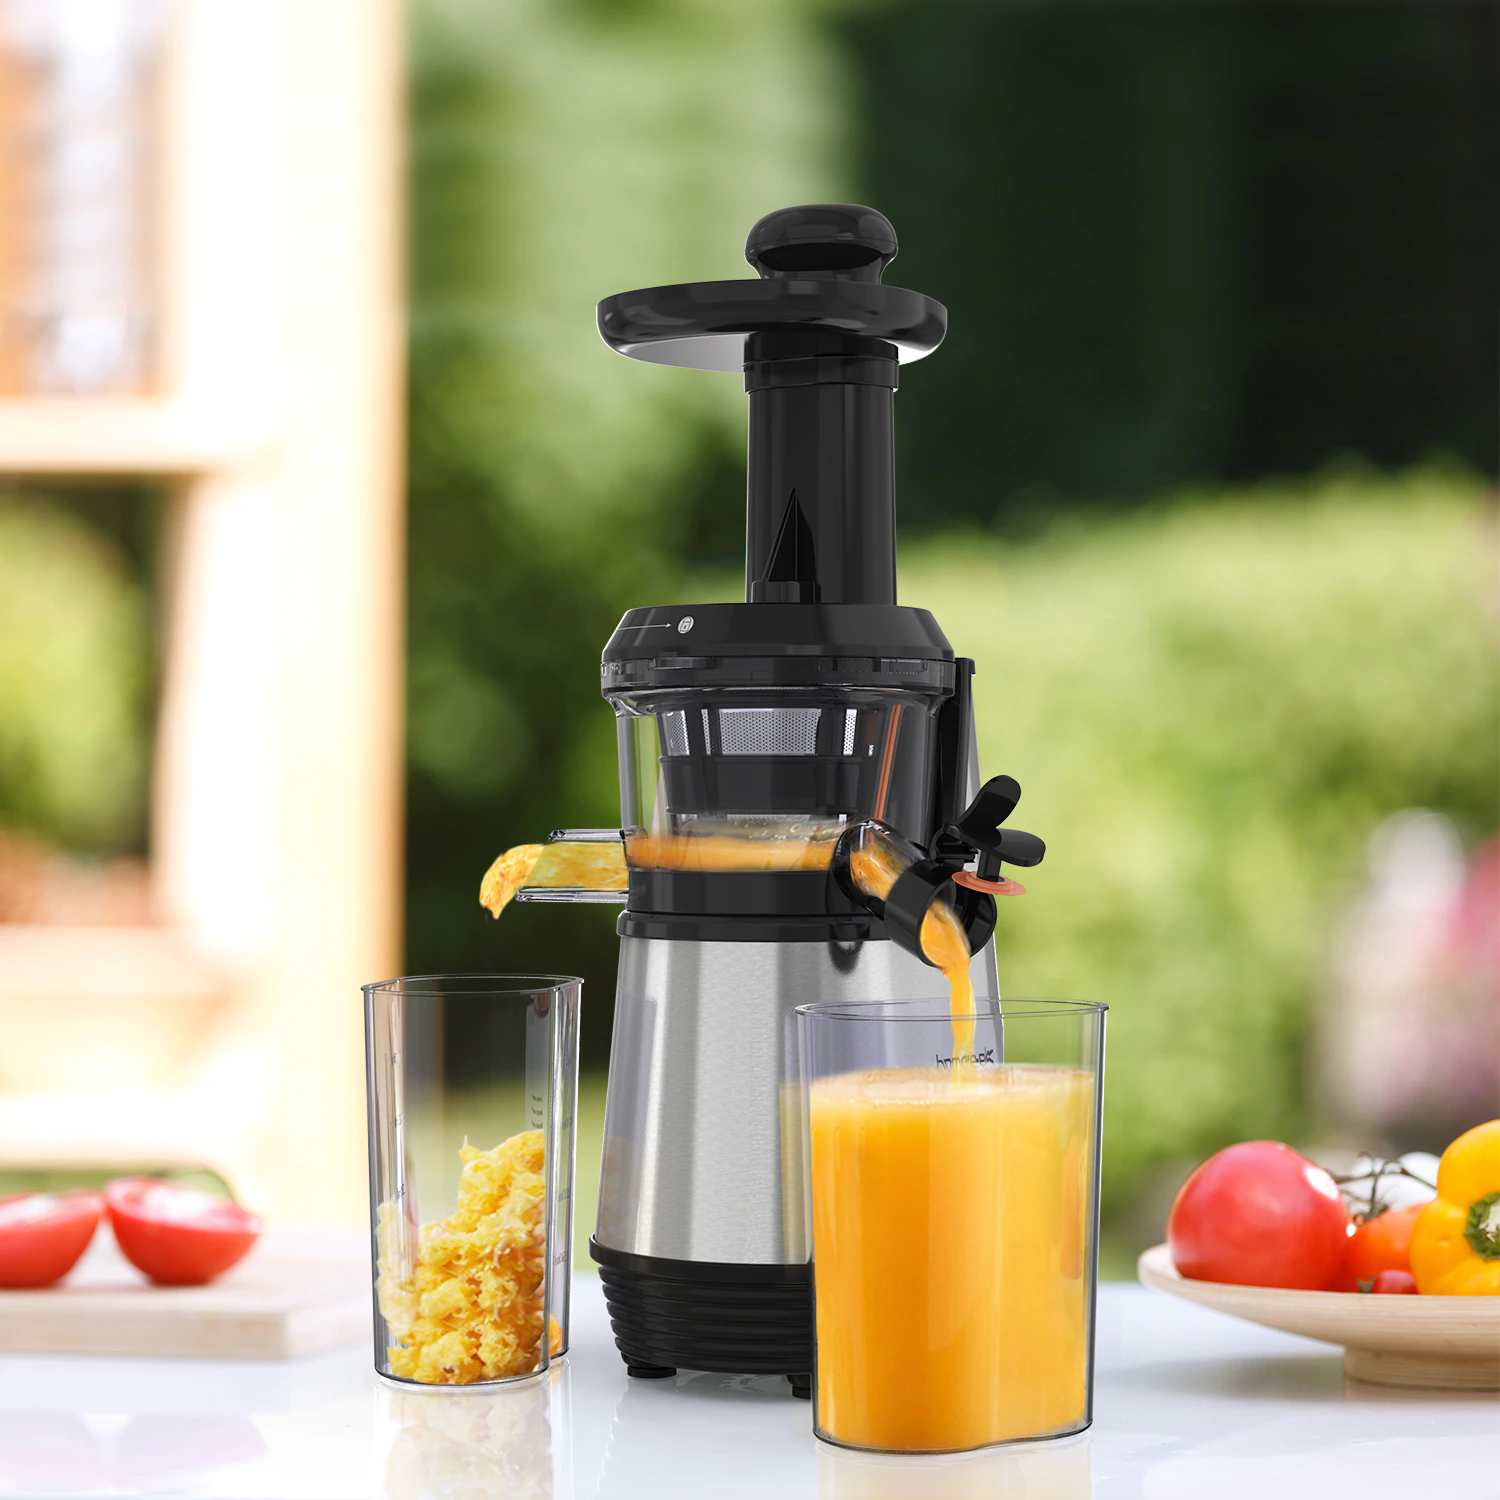 How To Use A Juicer Machine